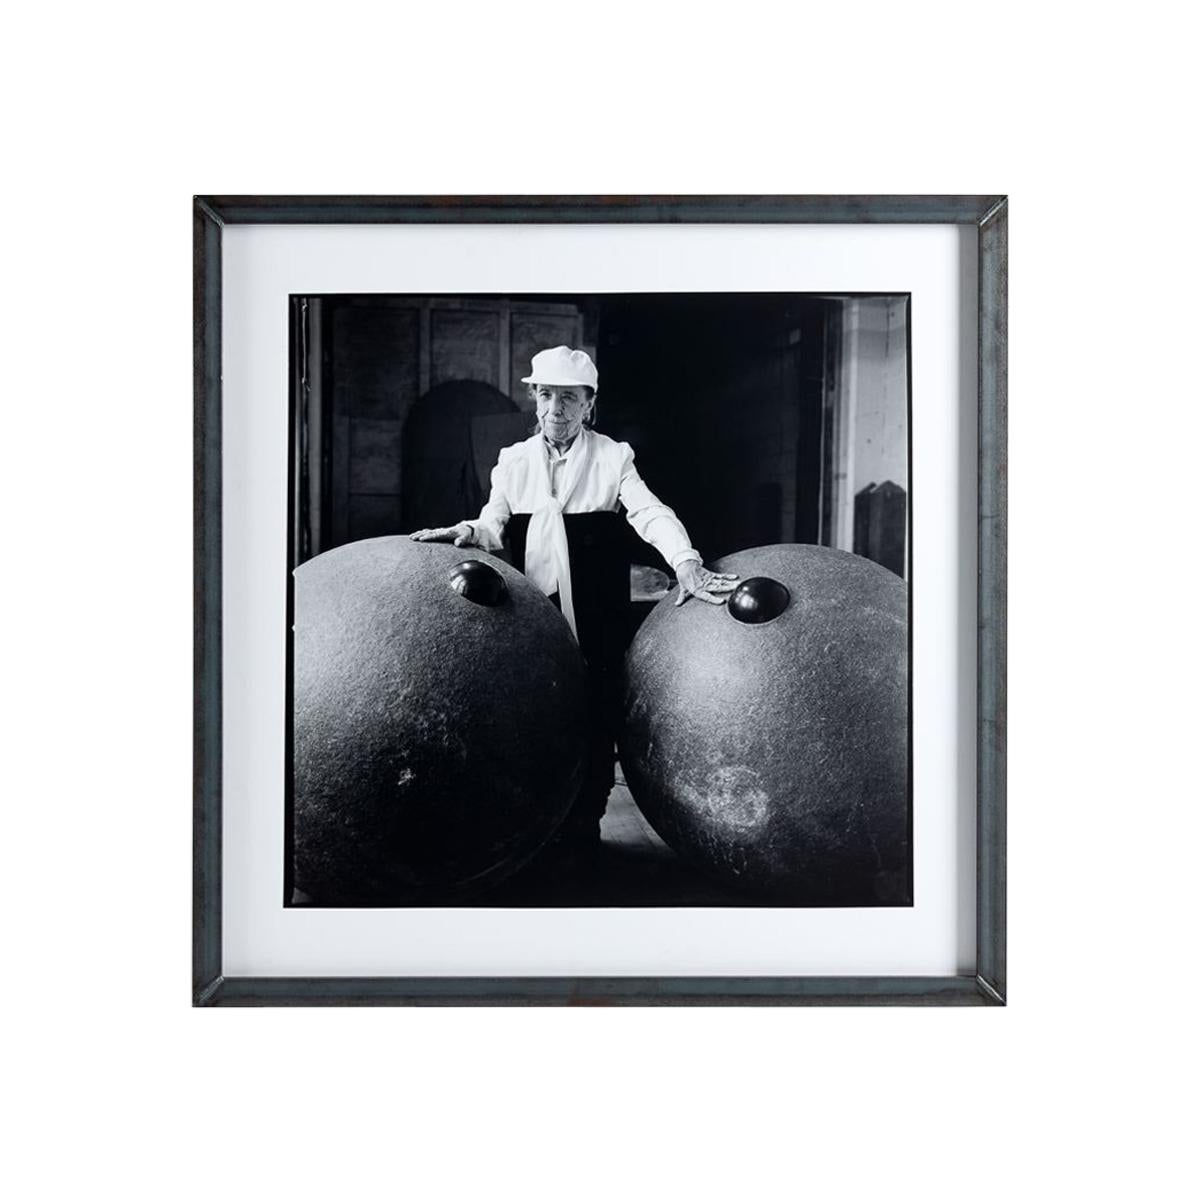 Jean-François Jaussaud, Louise Bourgeois, Brooklyn, 1995 Nos Amis, France, 1995 For Sale